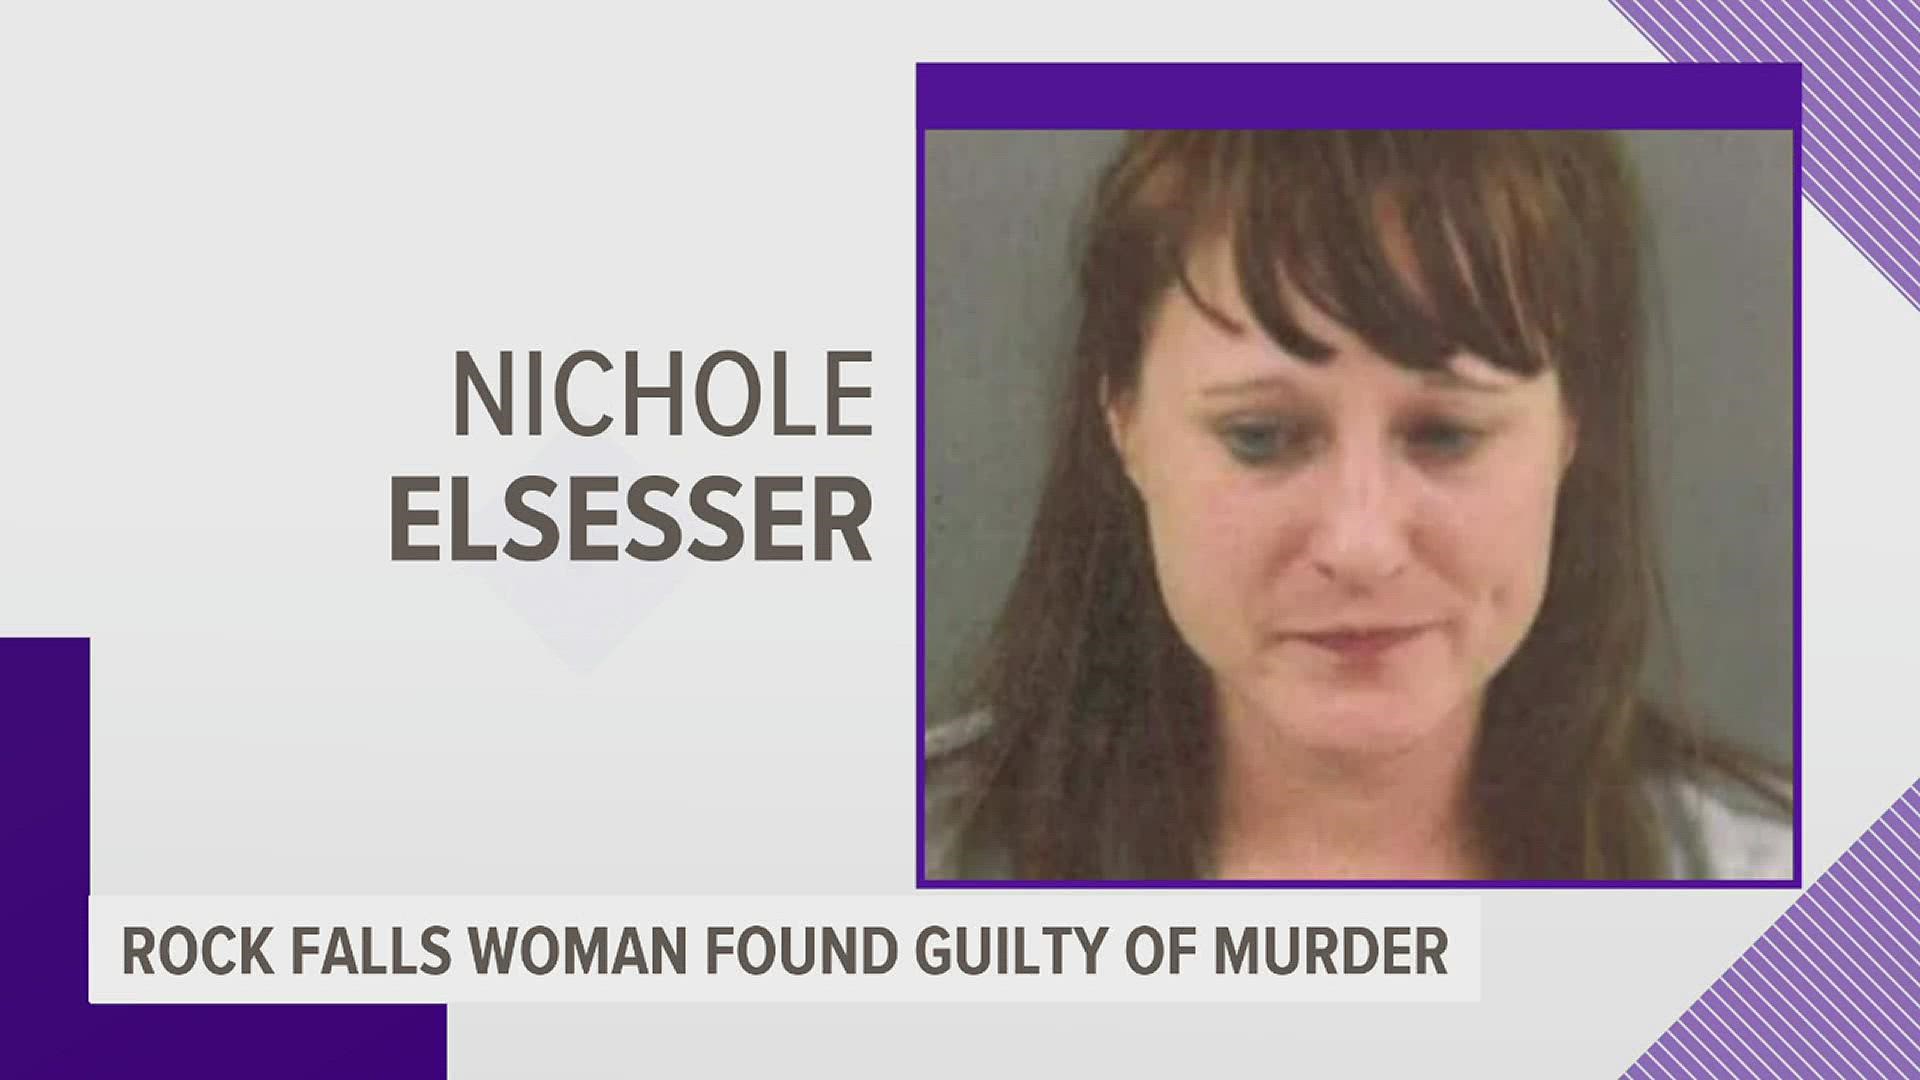 Nichole Elsesser was found guilty of stabbing her then-friend 53-year-old Tracy Russel to death back in 2019.